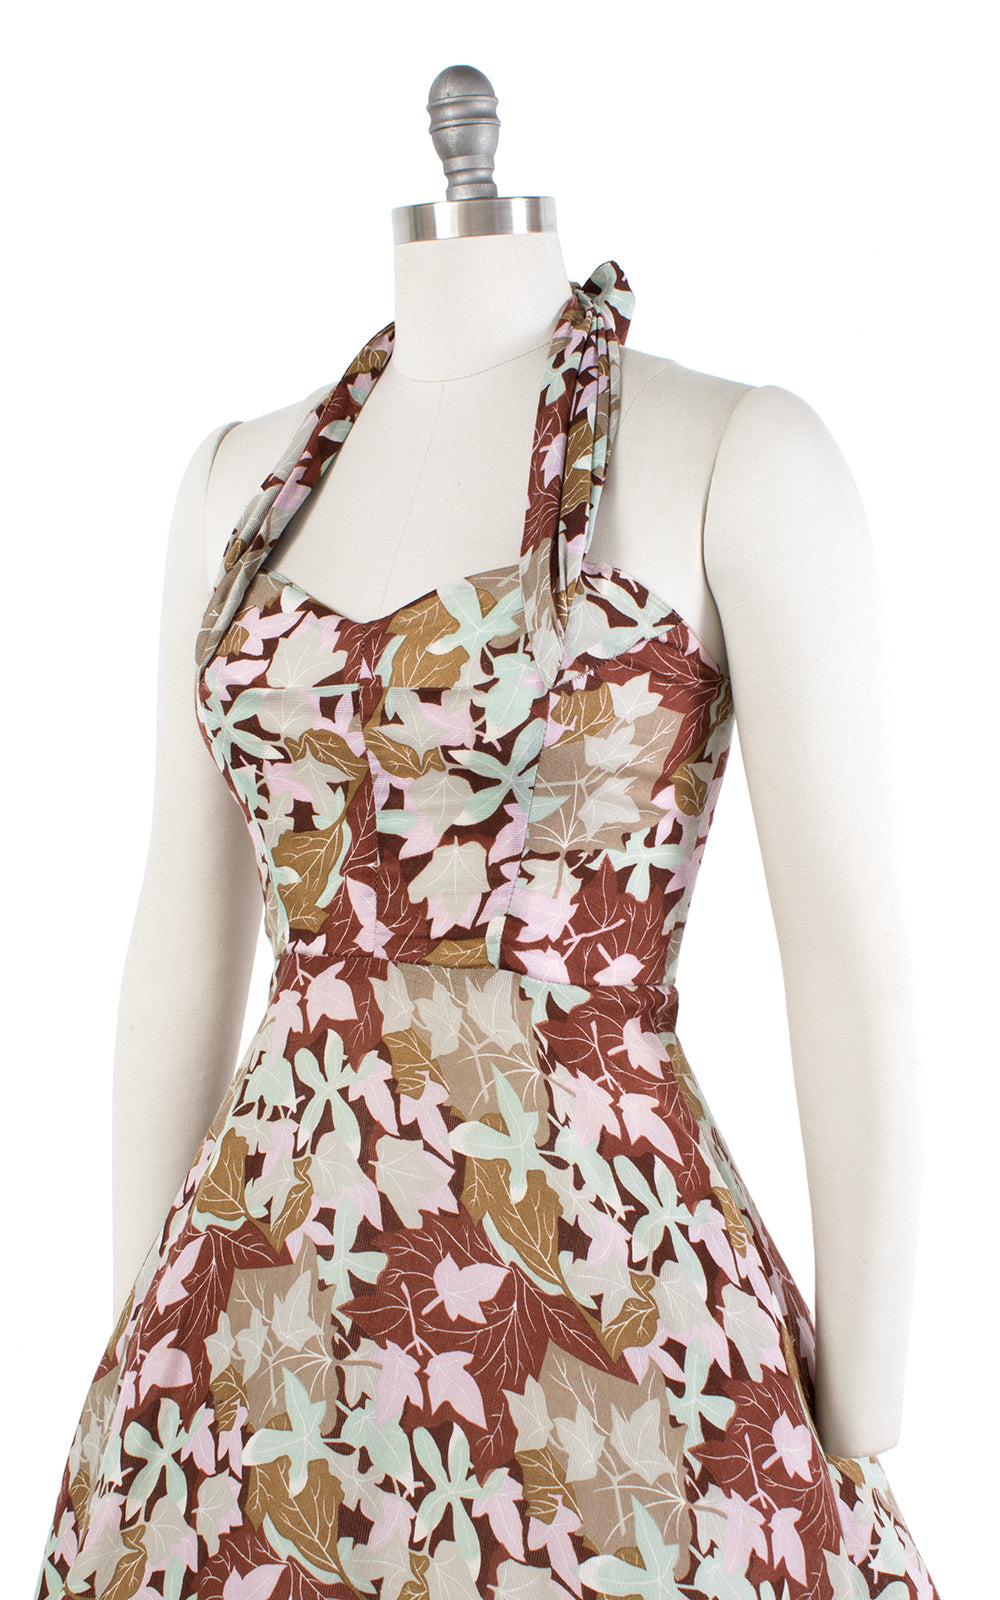 1950s Style Leaf Printed Halter Sundress with Pockets